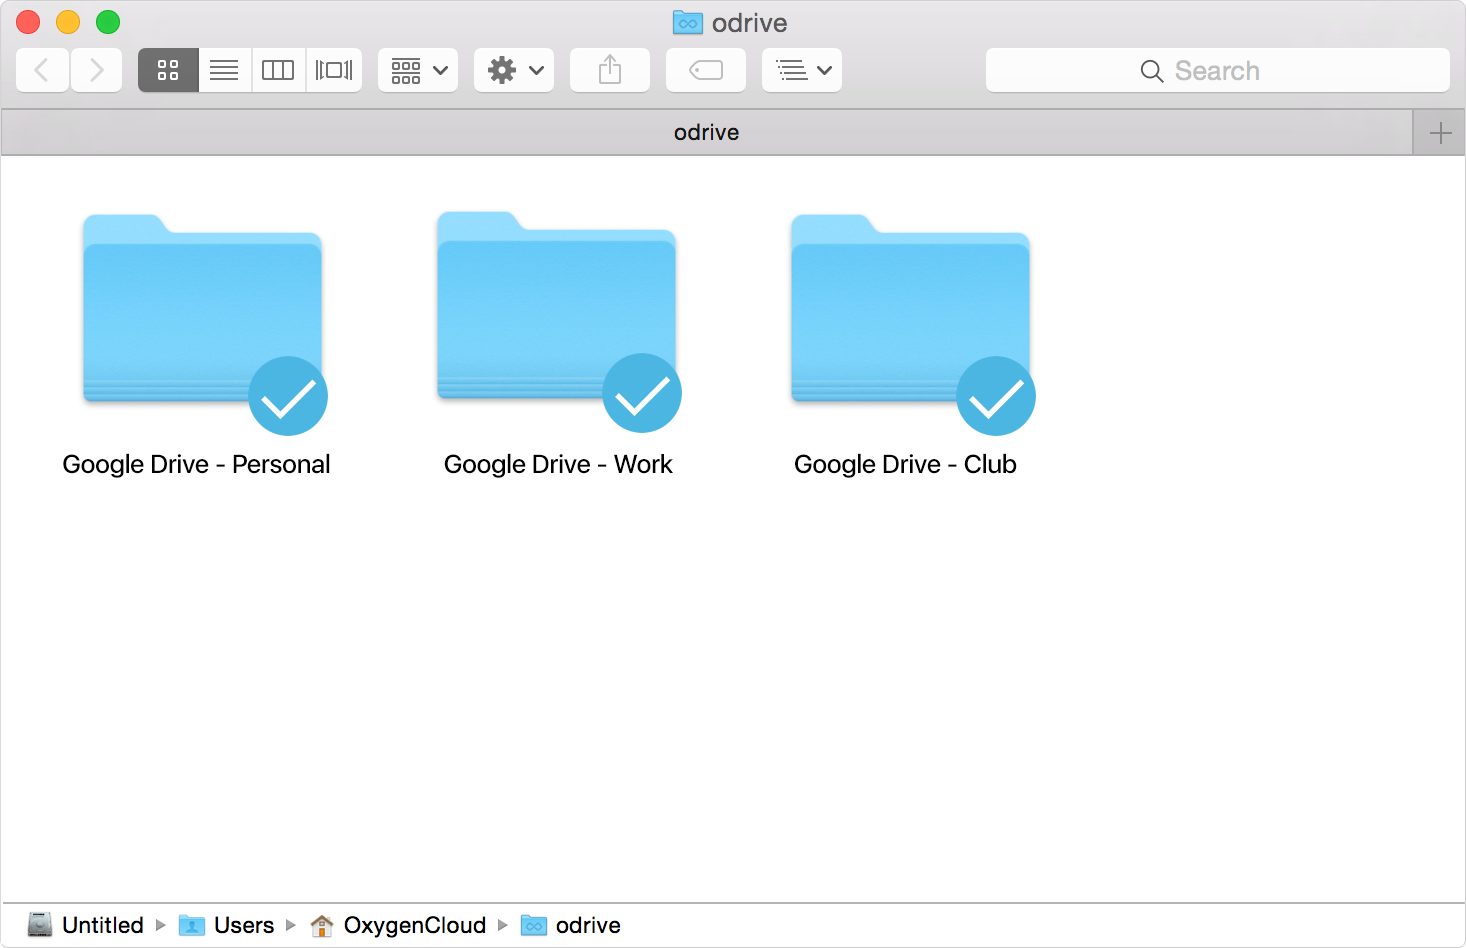 how to download all photos from google drive